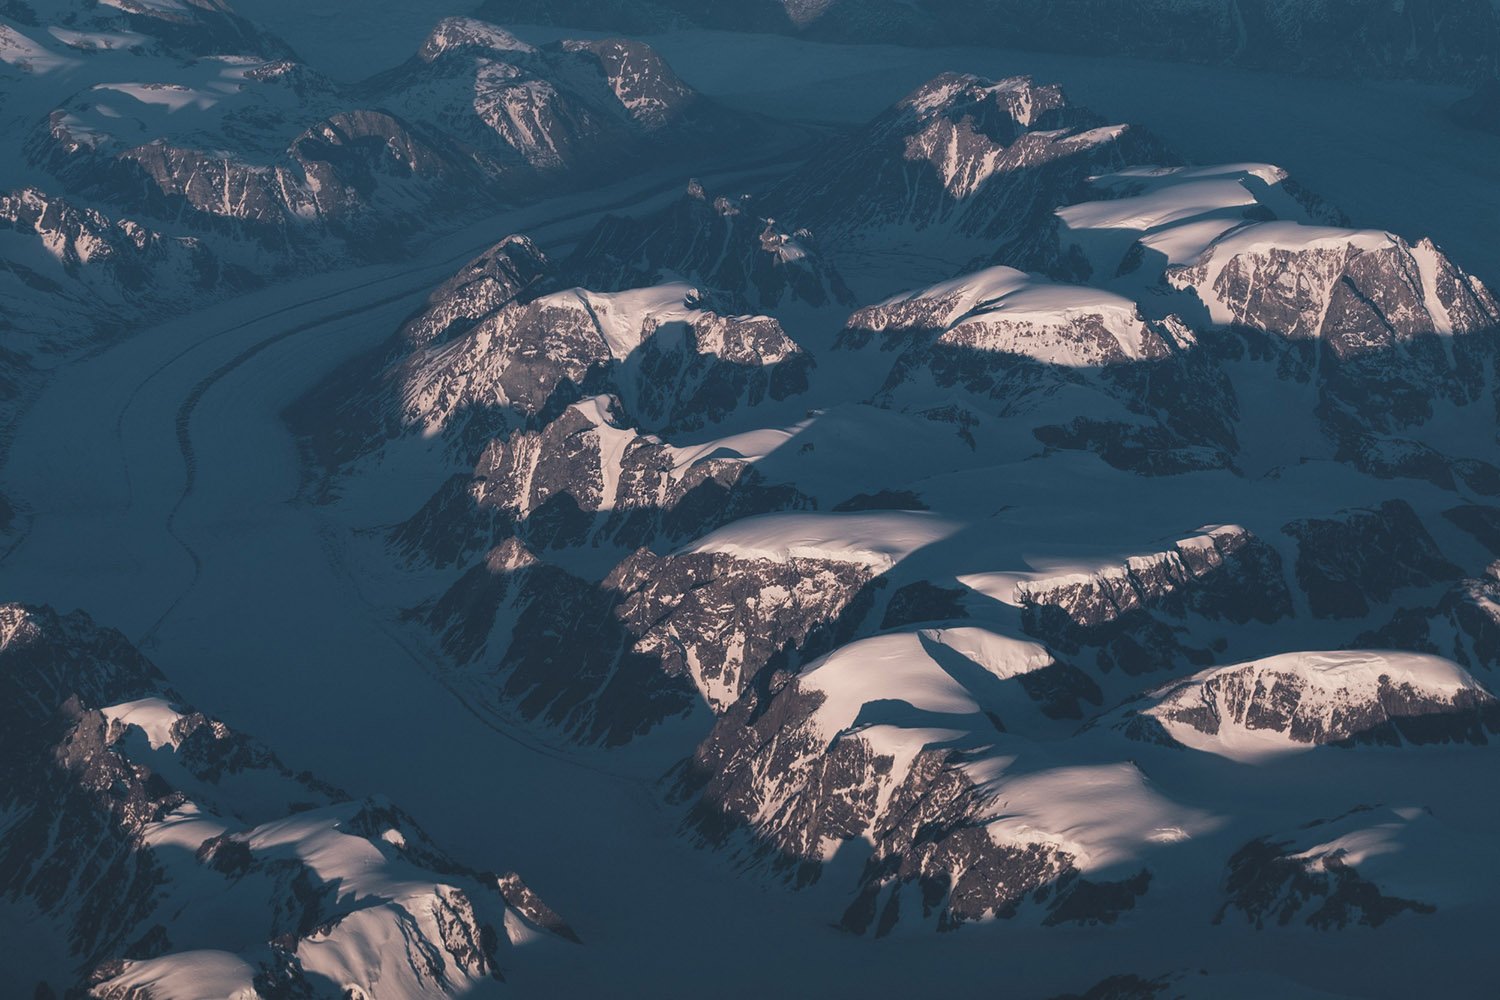 Glacier and mountains of Greenland